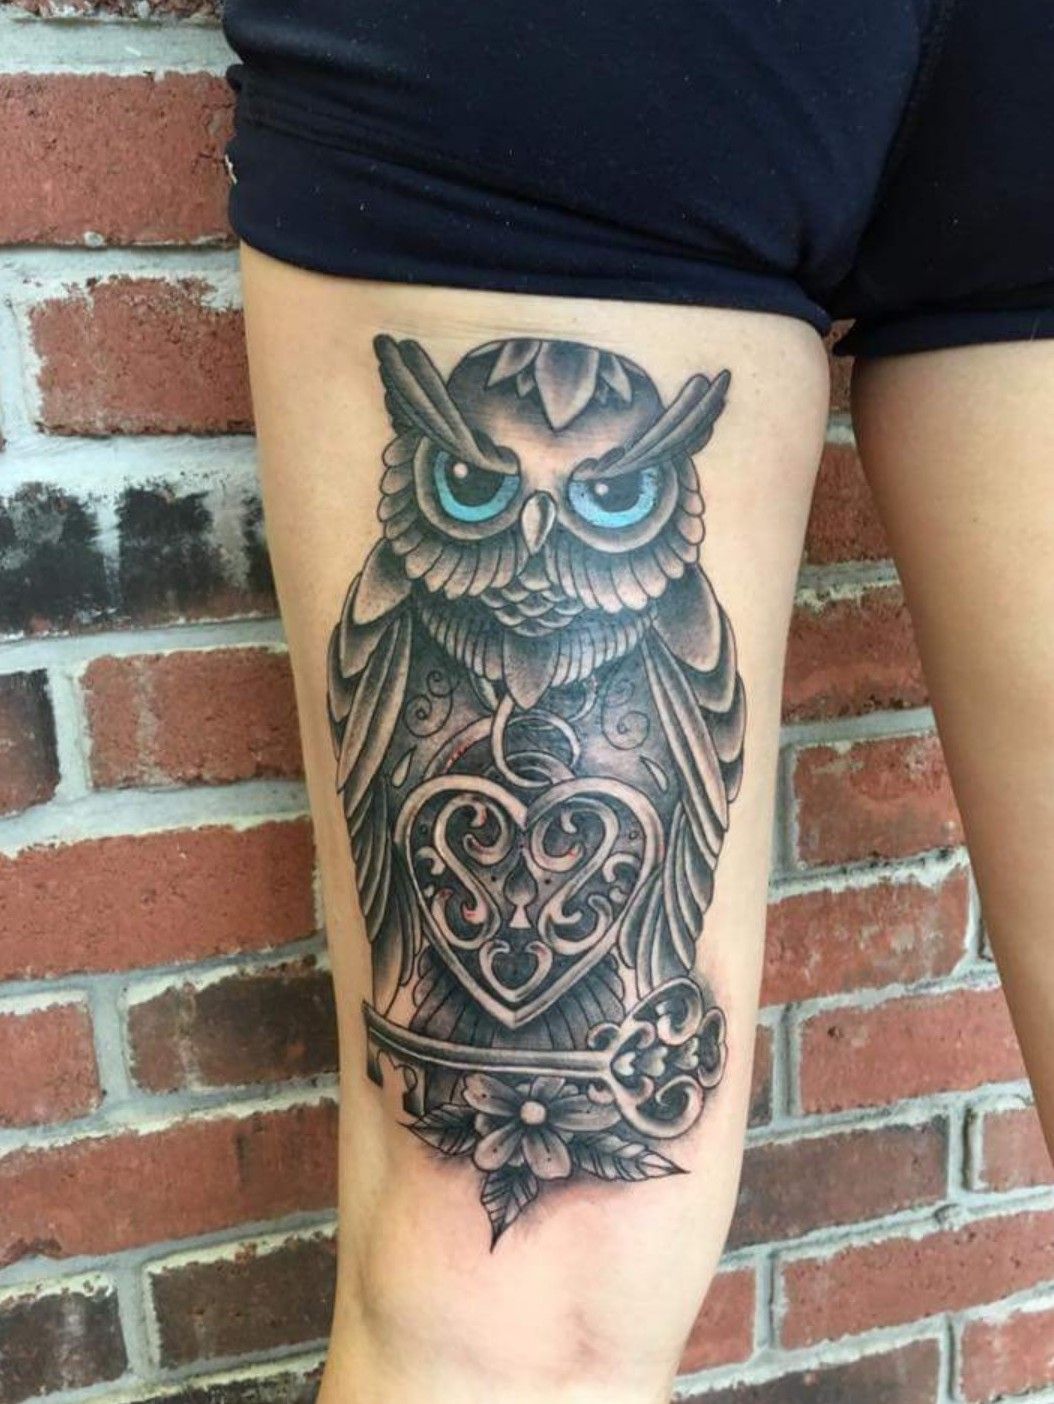 Tattoo uploaded by Jodie Leigh Aspland • Back of thigh owl, locket heart  and guarded key • Tattoodo